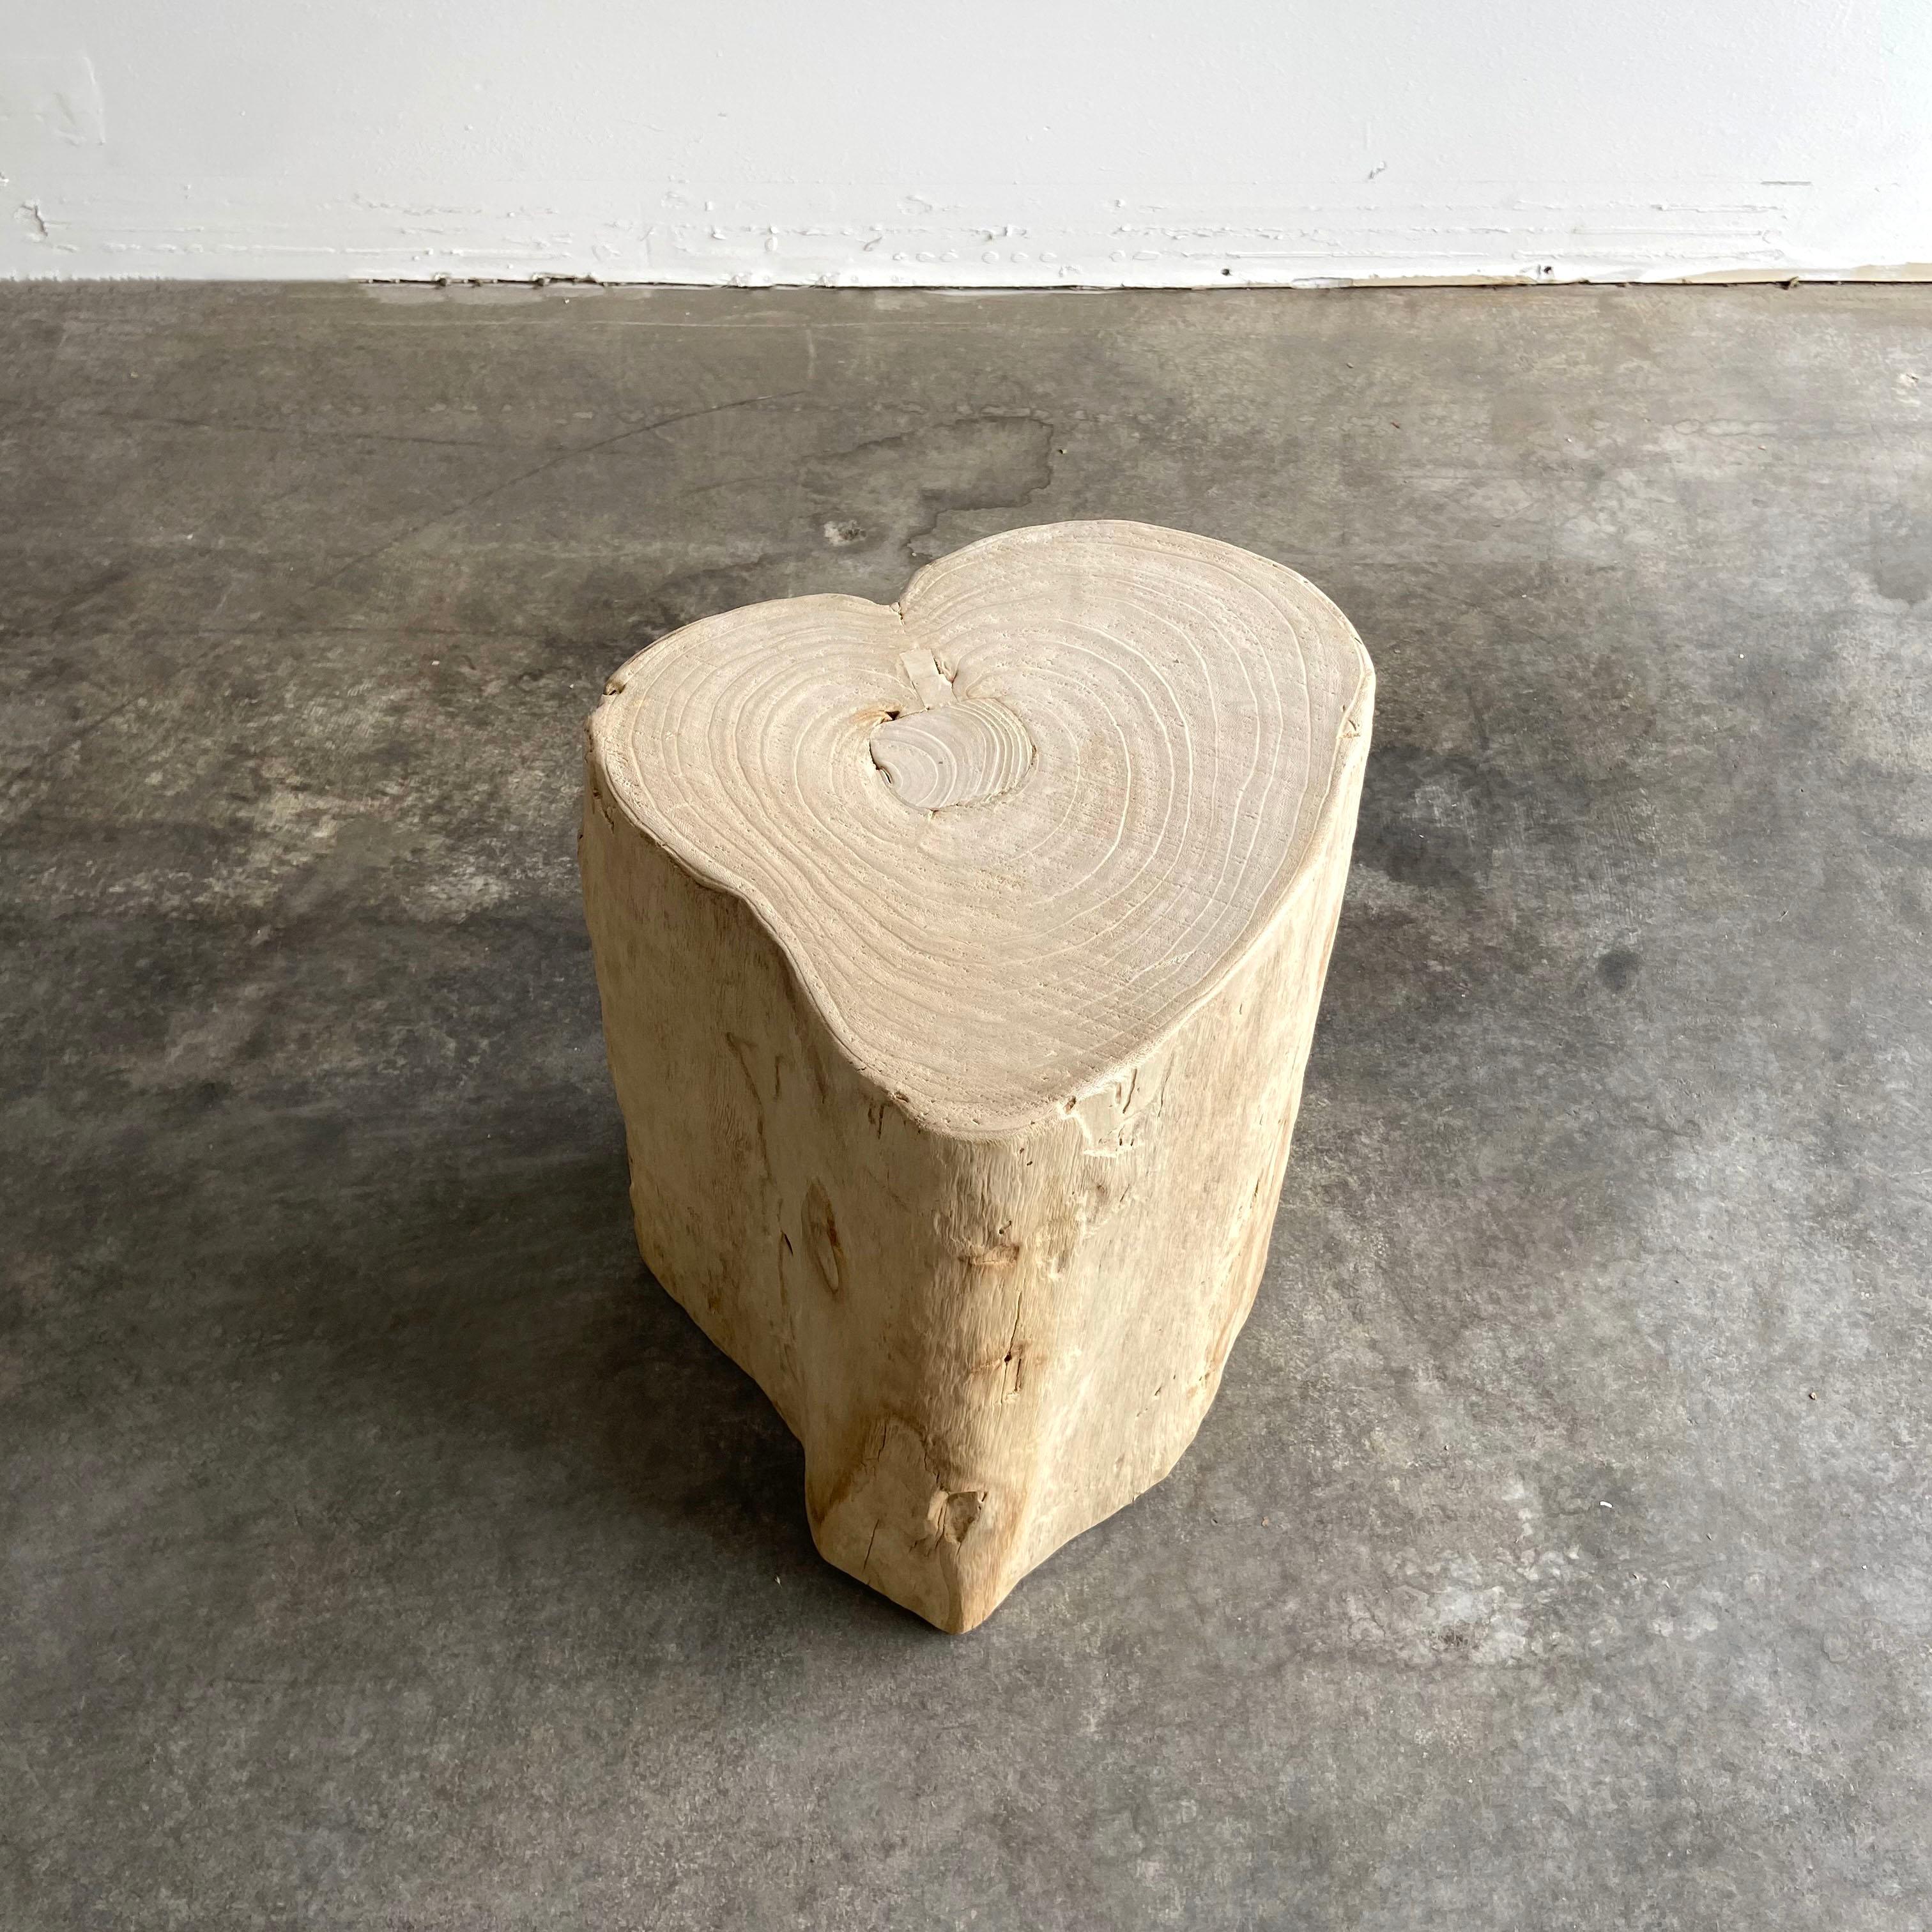 Heart shaped birch wood stump side table
Natural stump with heart shape is the perfect side table.
Measures: 16” W x 14” D x 19” H.